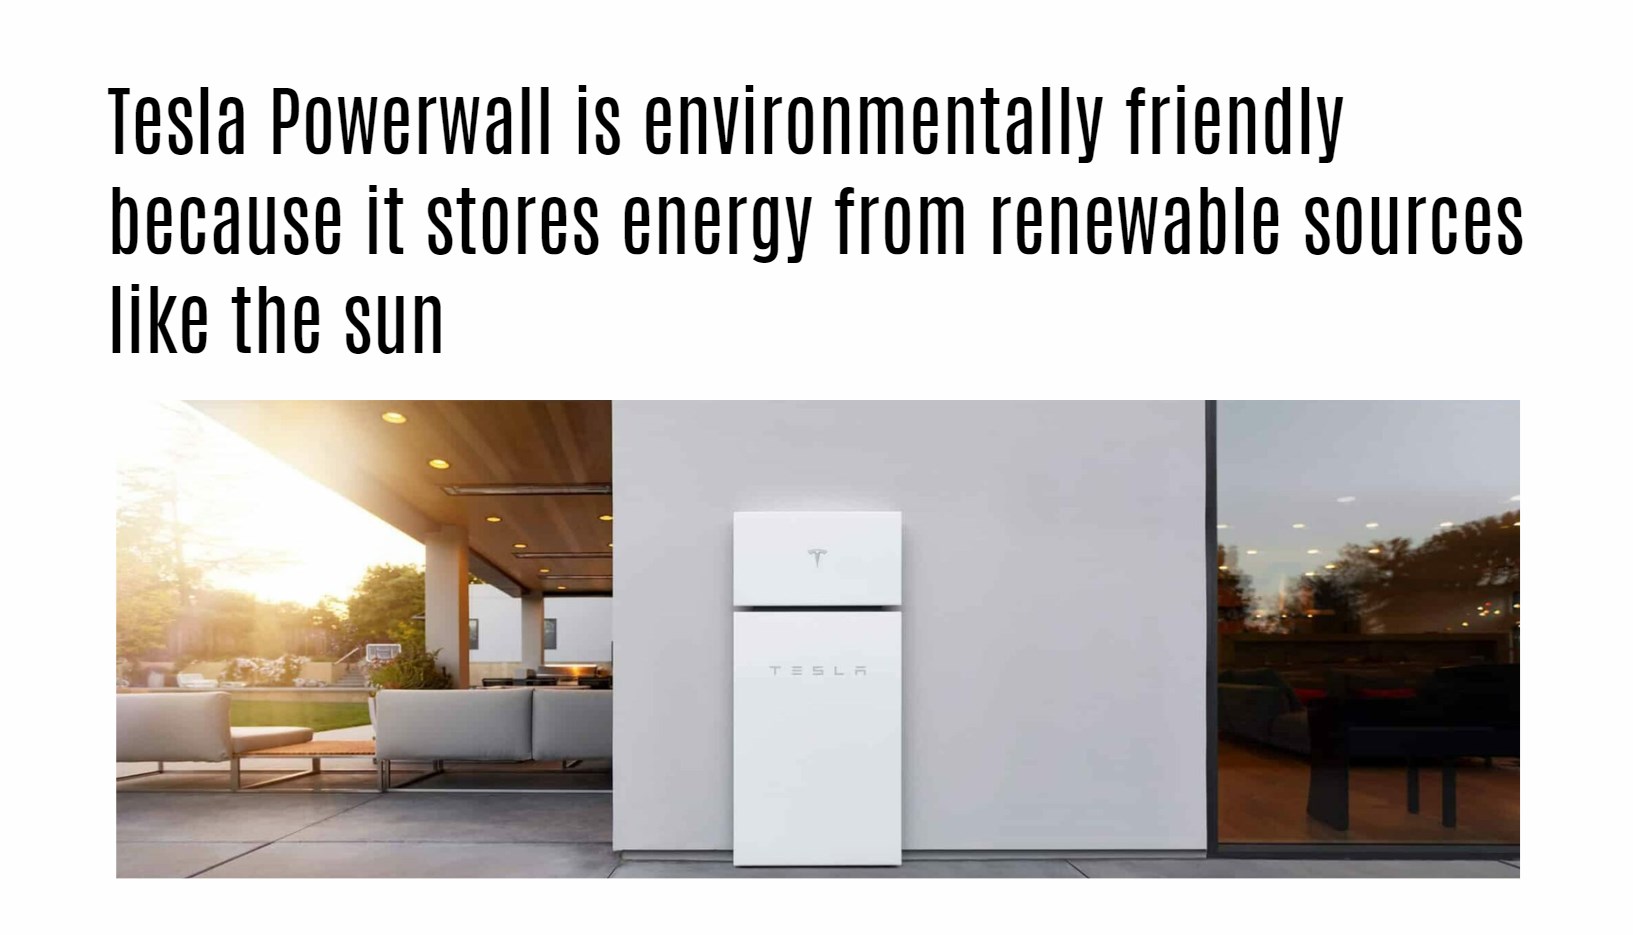 Tesla Powerwall is environmentally friendly because it stores energy from renewable sources like the sun